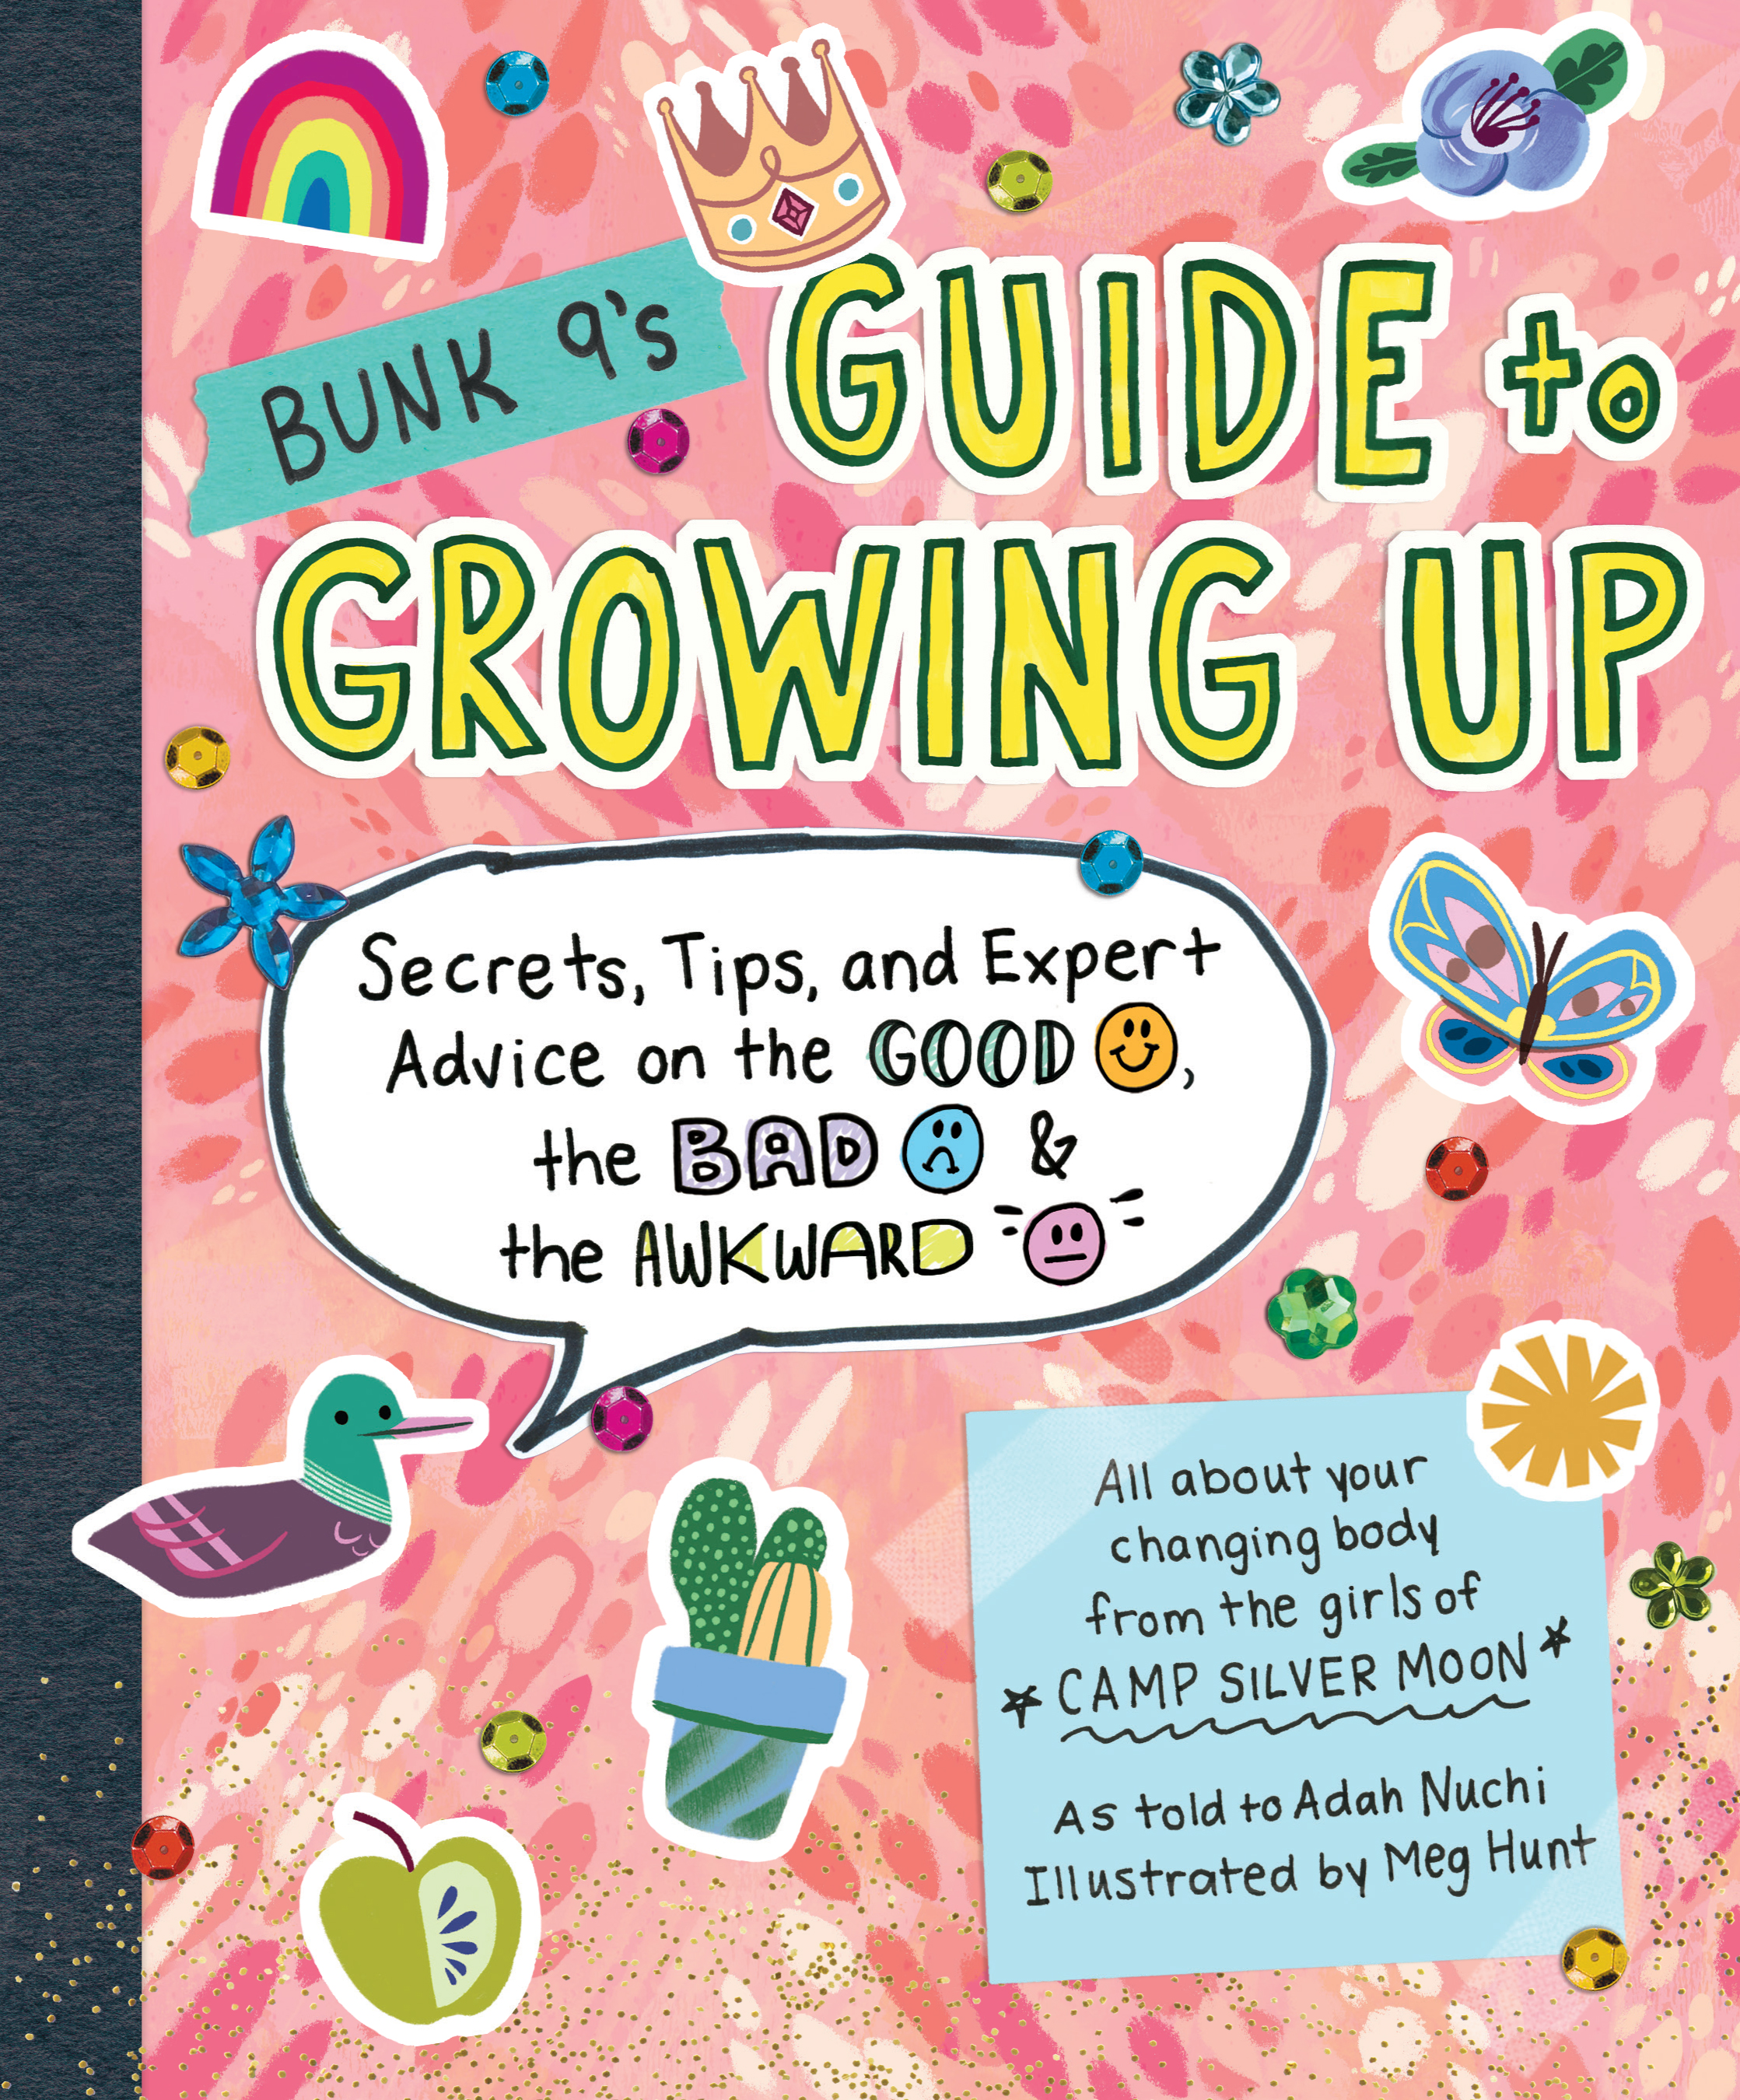 Bunk 9s Guide to Growing Up by Adah Nuchi Hachette Book Group